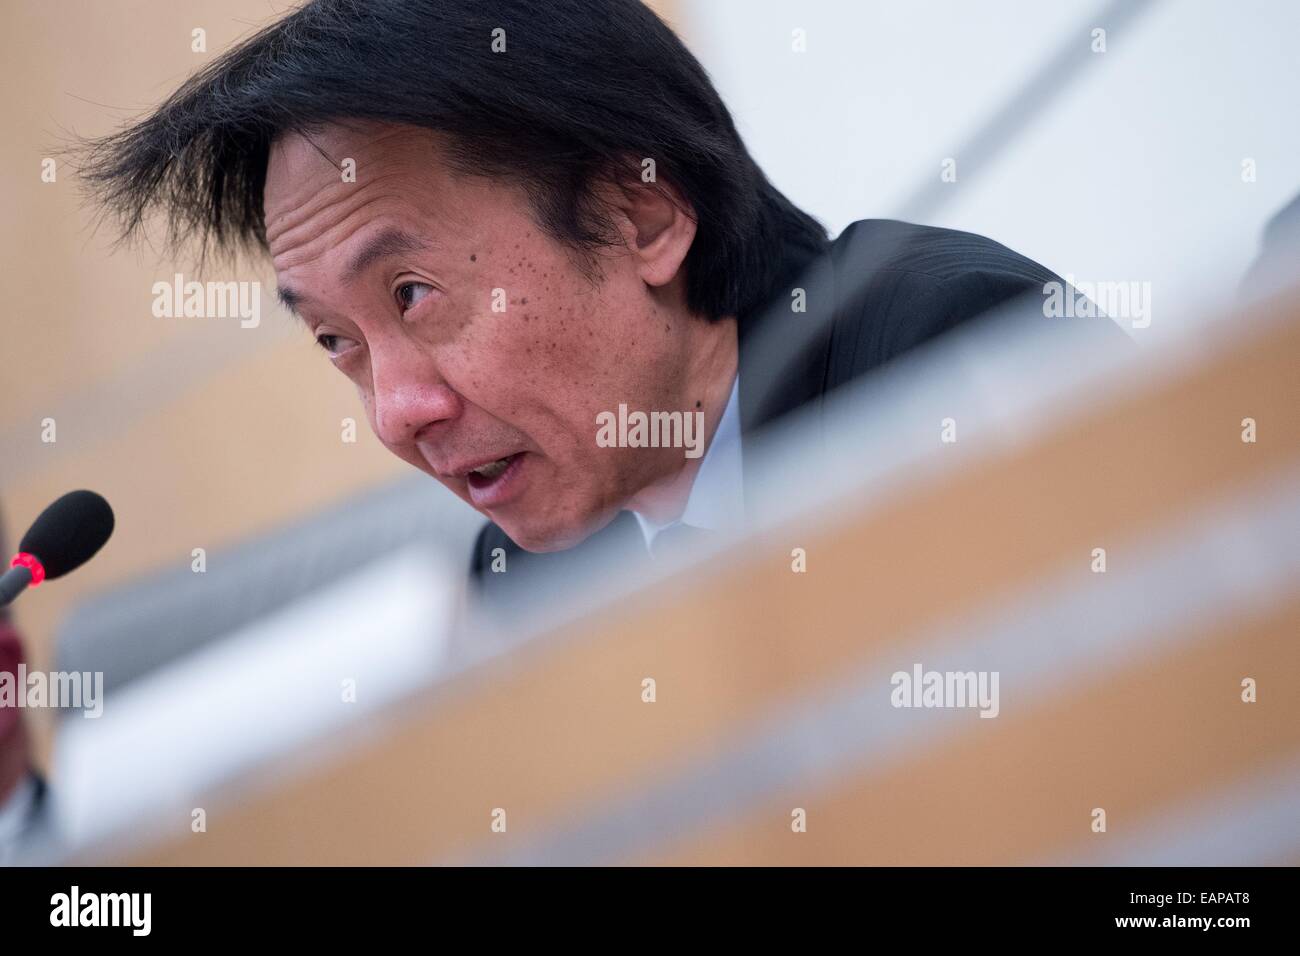 Director and music director of the Wuppertal Opera, Toshiyuki Kamioka, attends a session of the cultural committee in Wuppertal, Germany, 19 - wuppertal-germany-19th-nov-2014-director-and-music-director-of-the-EAPAT8